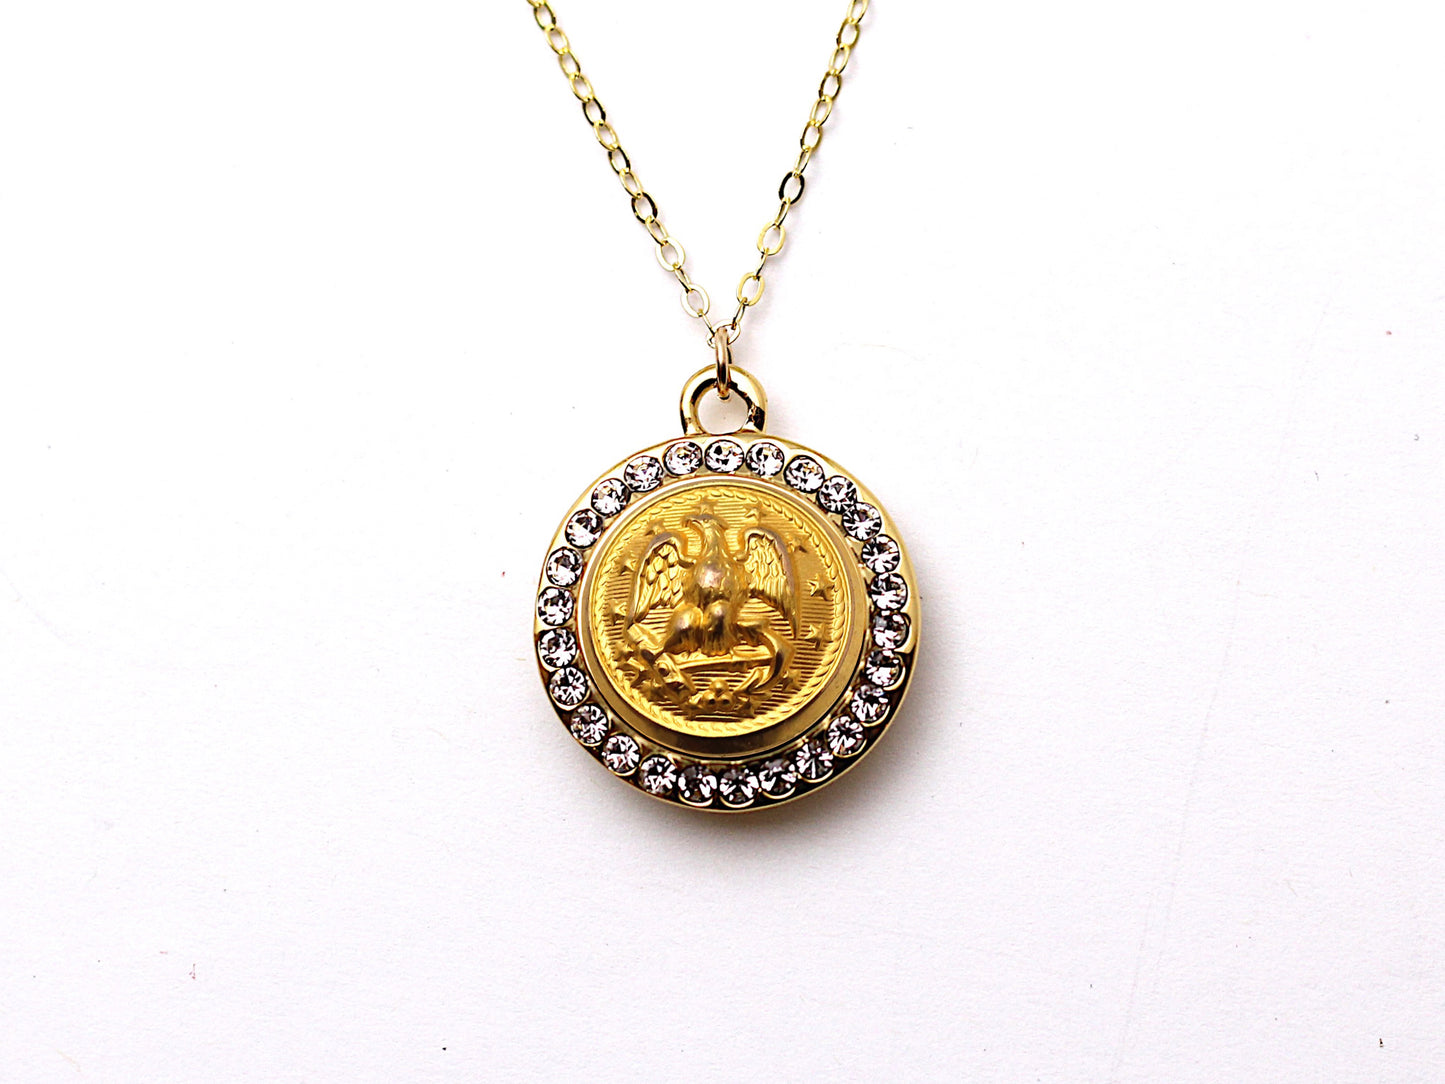 Navy Button Necklace - Small Rhinestone Gold Pendant